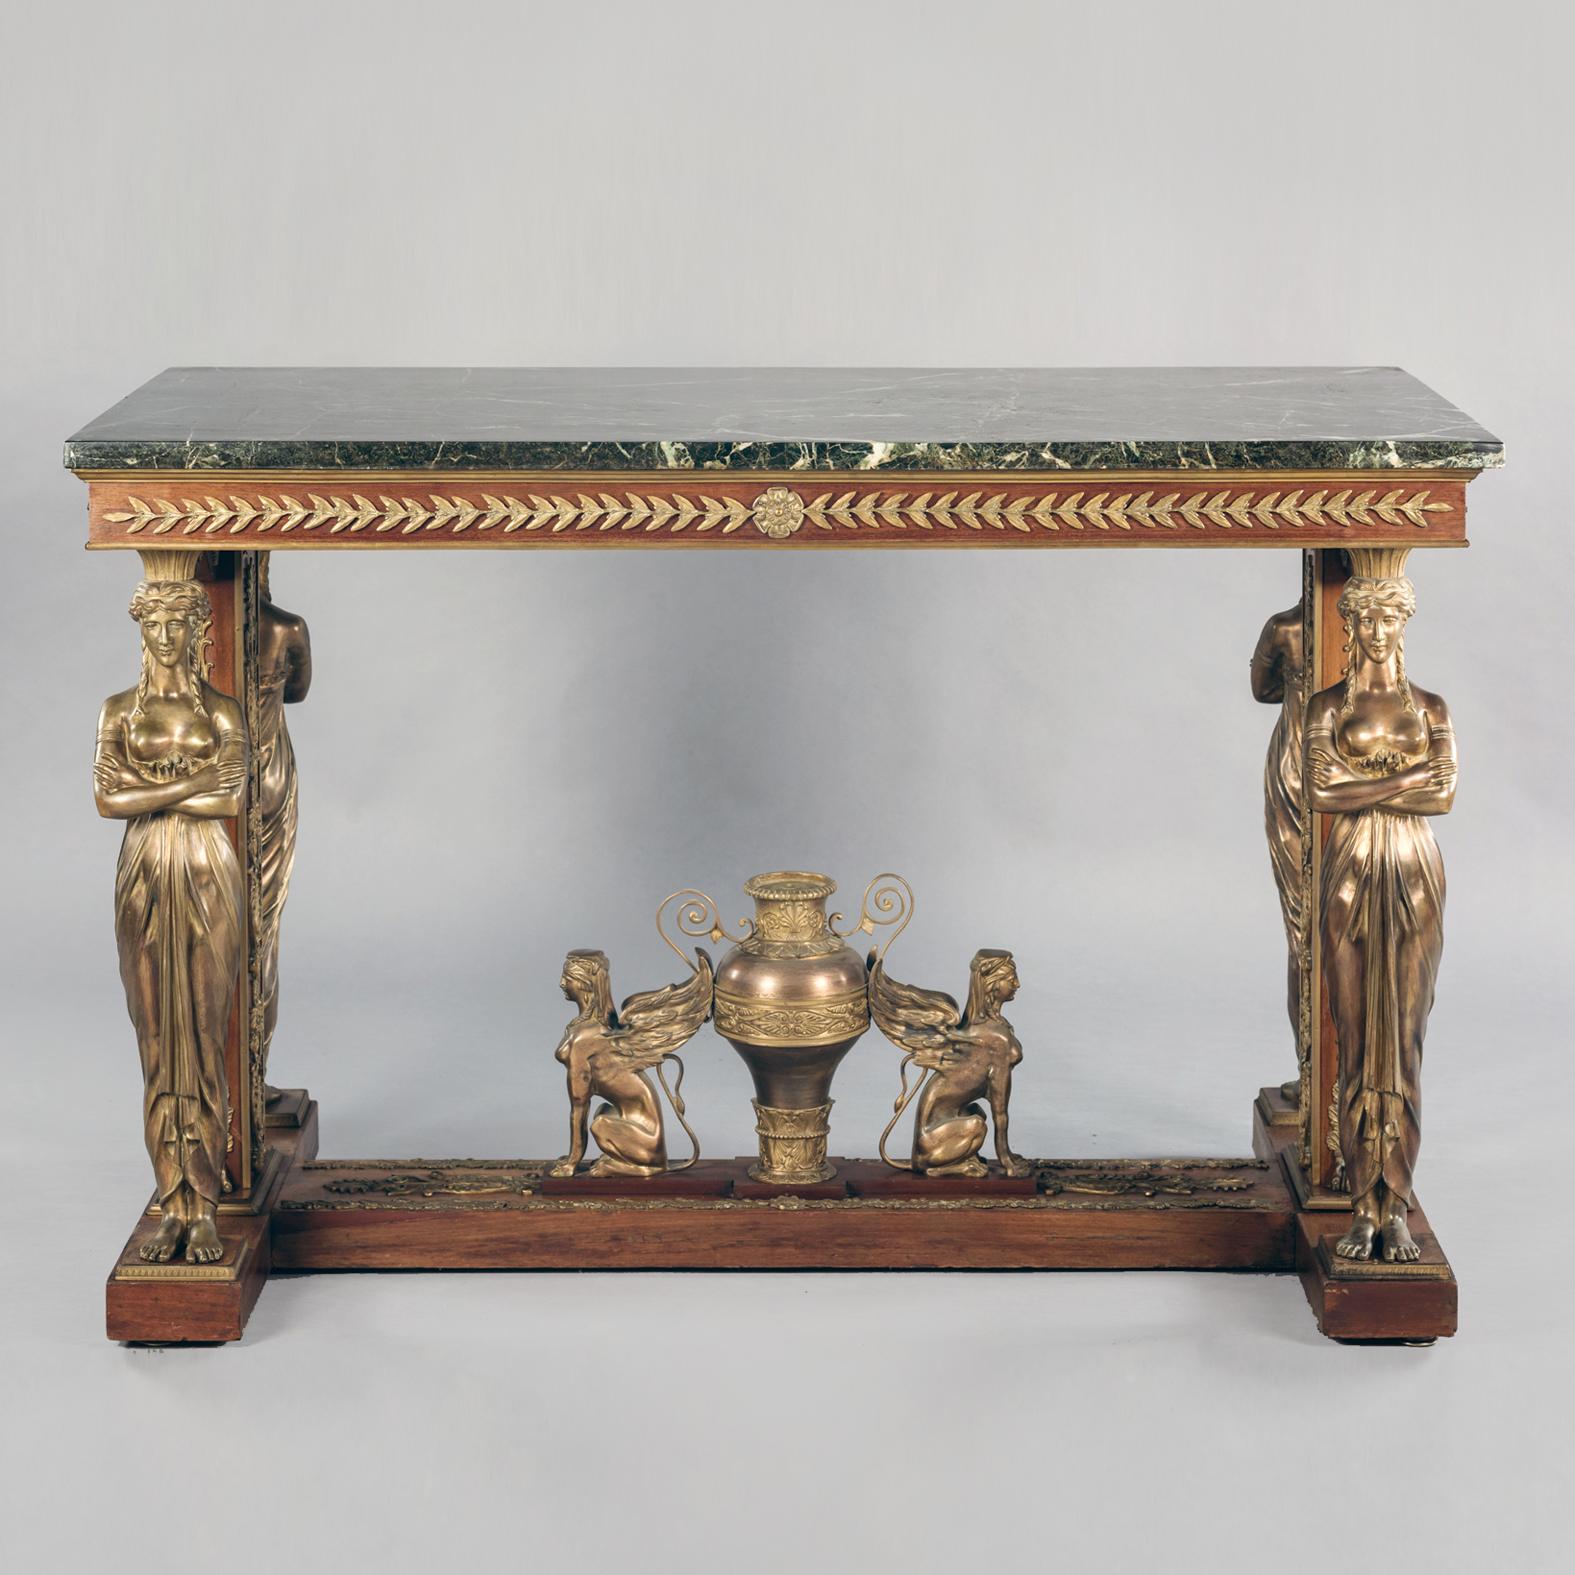 A fine Empire style gilt-bronze mounted mahogany centre table with a Vert de Mer marble top, in the manner of Jacob-Desmalter. 

The rectangular Verde Antico marble top sits above a frieze applied with laurel leaves, supported by two gilt-bronze